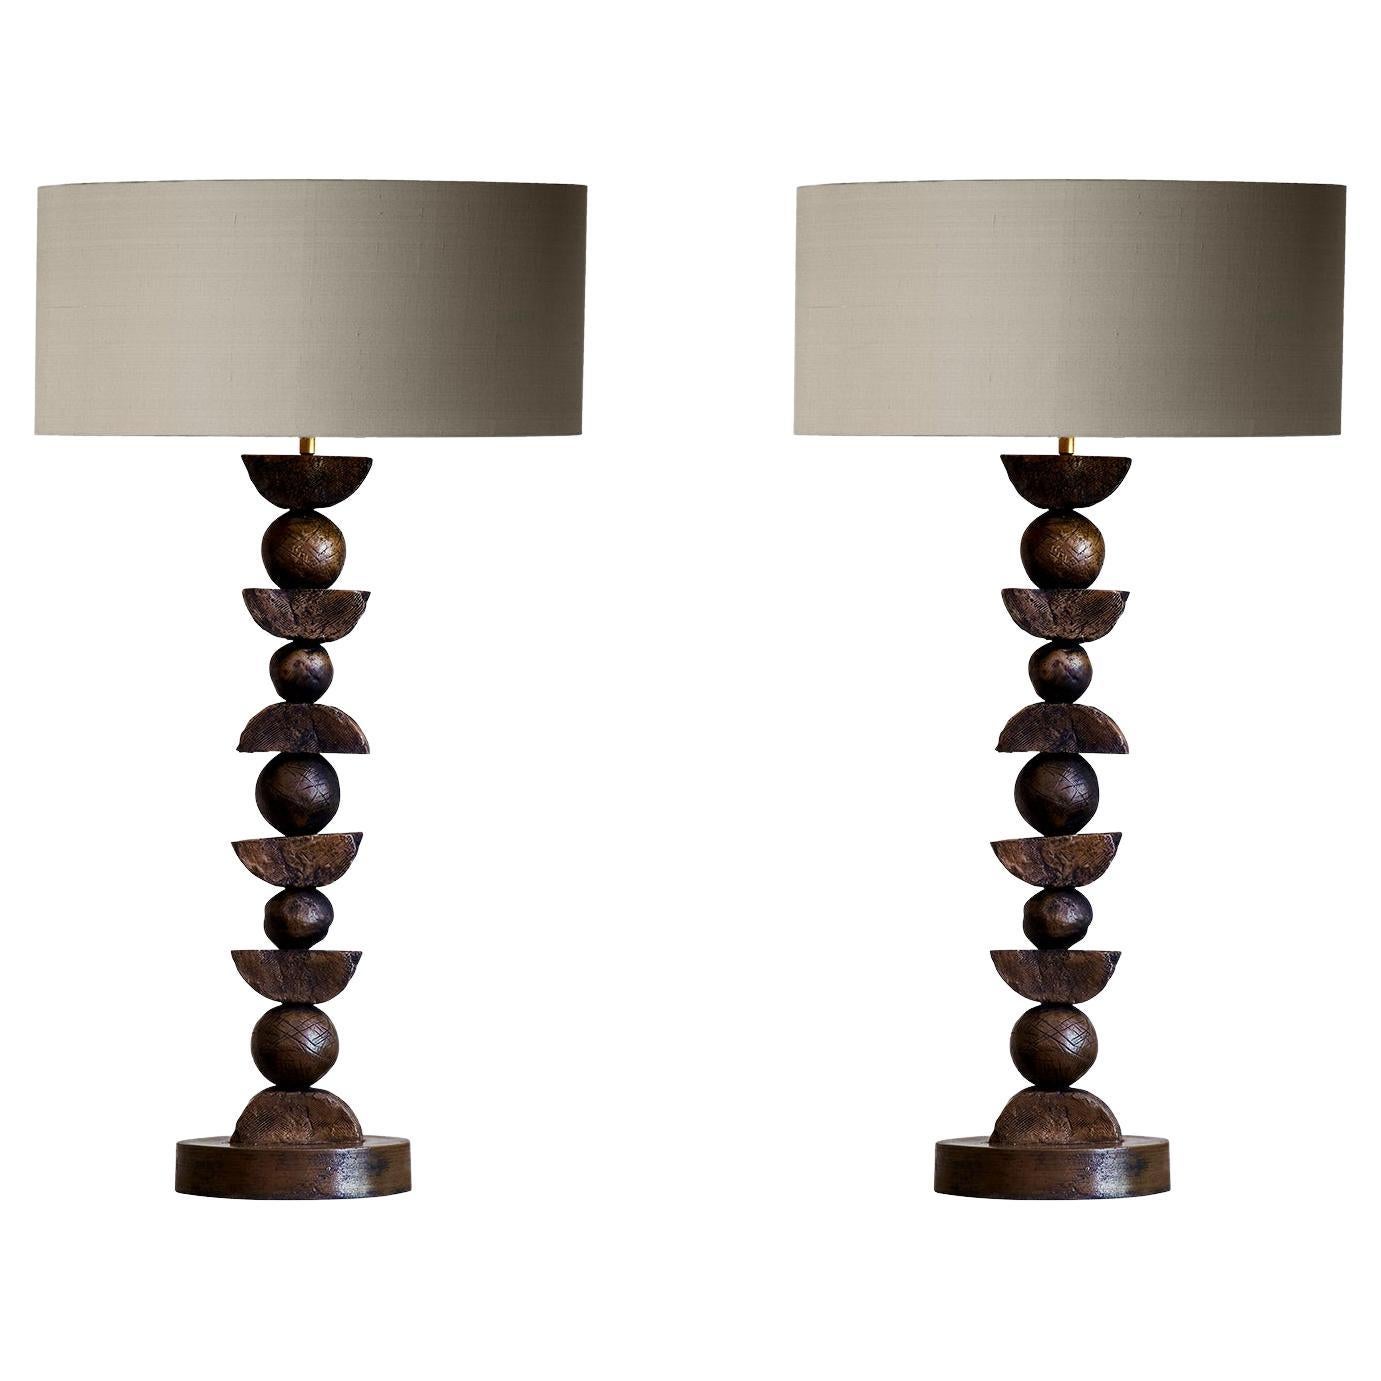 Contemporary European Bronze Silhouette Table Lamp by Margit Wittig